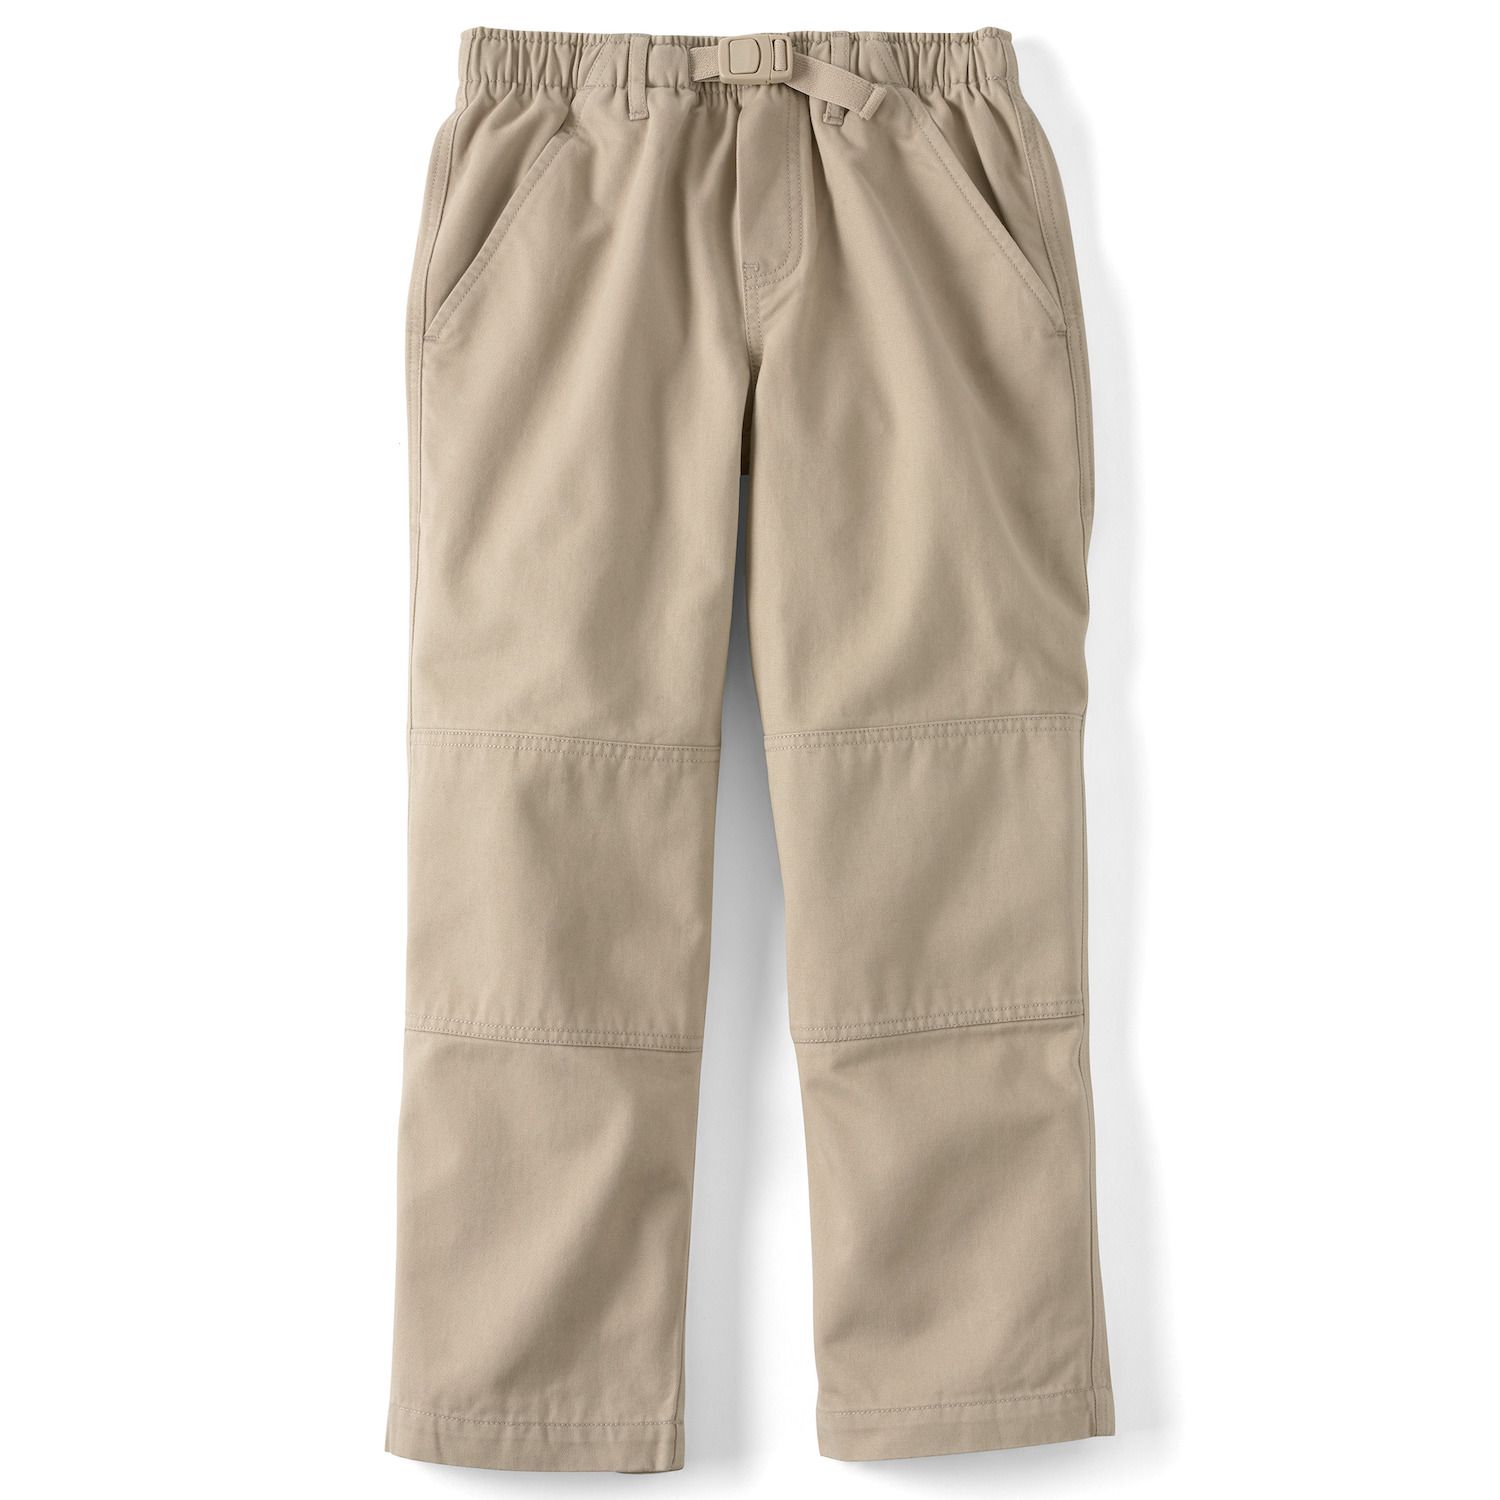 Image for Lands' End Boys 4-7 Iron Knee Pull On Climber Pants in Regular & Slim at Kohl's.